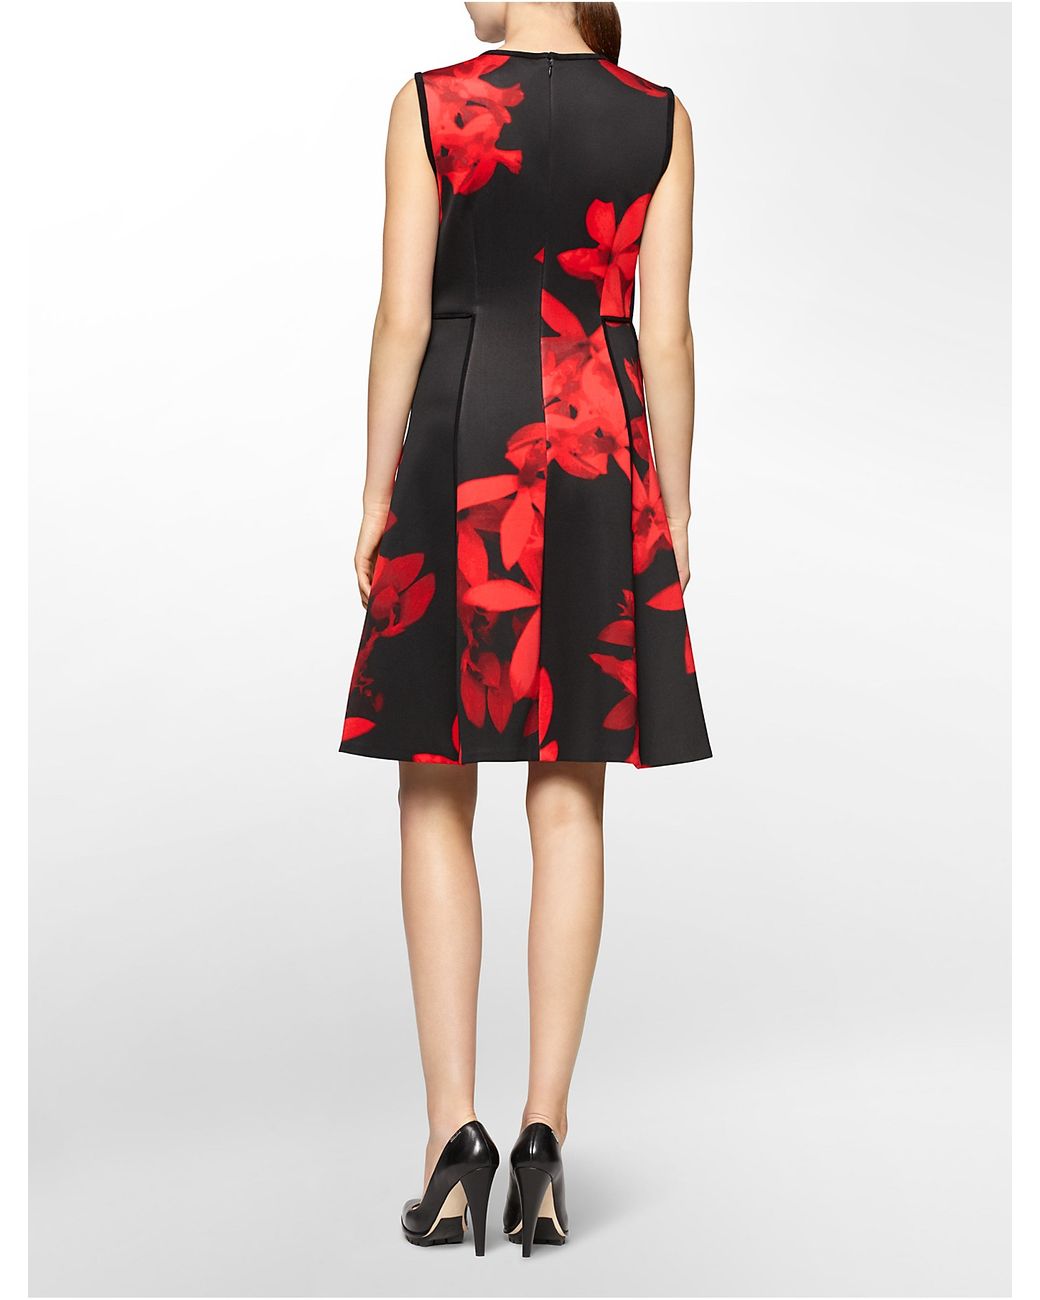 Calvin Klein White Label Exploded Floral Print Sleeveless Fit Flare Dress  in Black Lyst